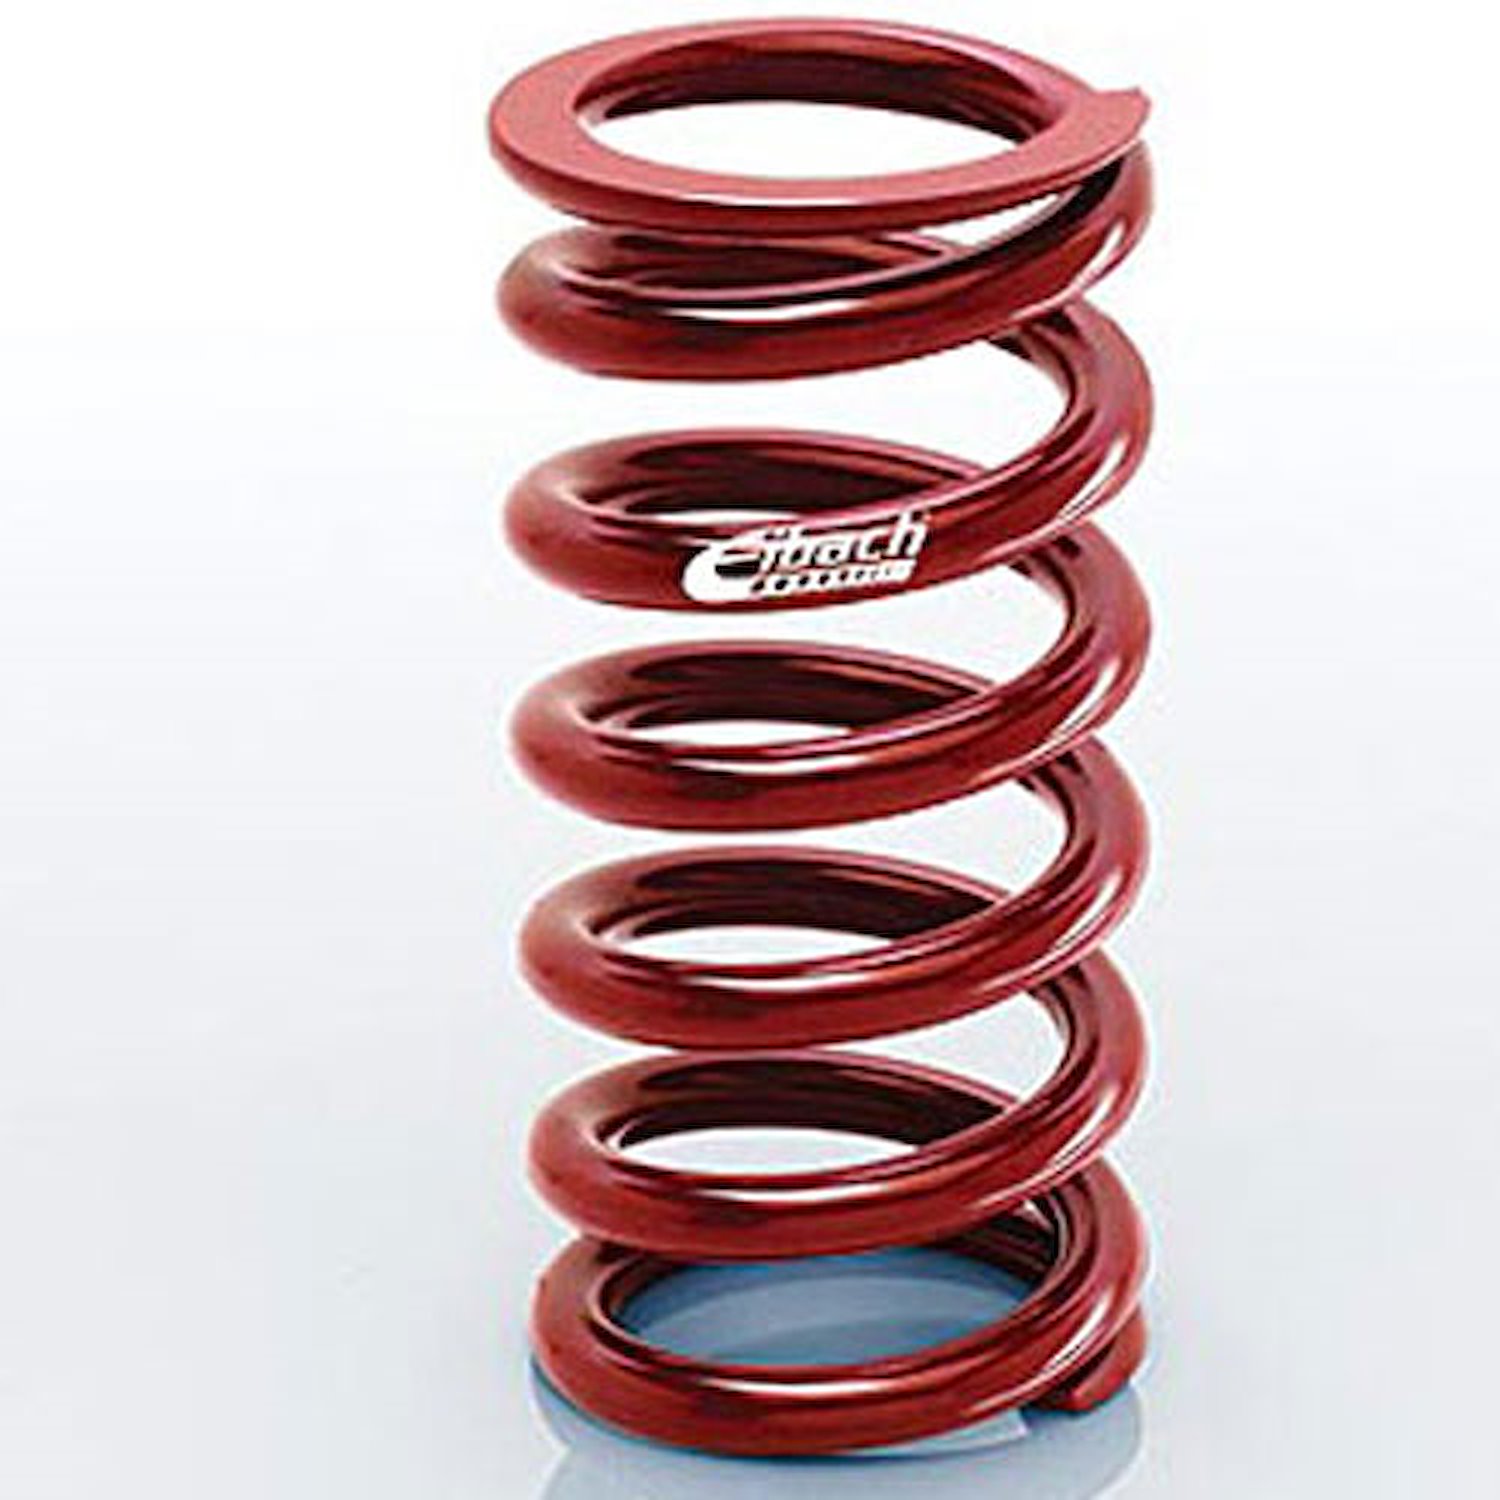 0950.500.1600 EIBACH CONVENTIONAL FRONT SPRING